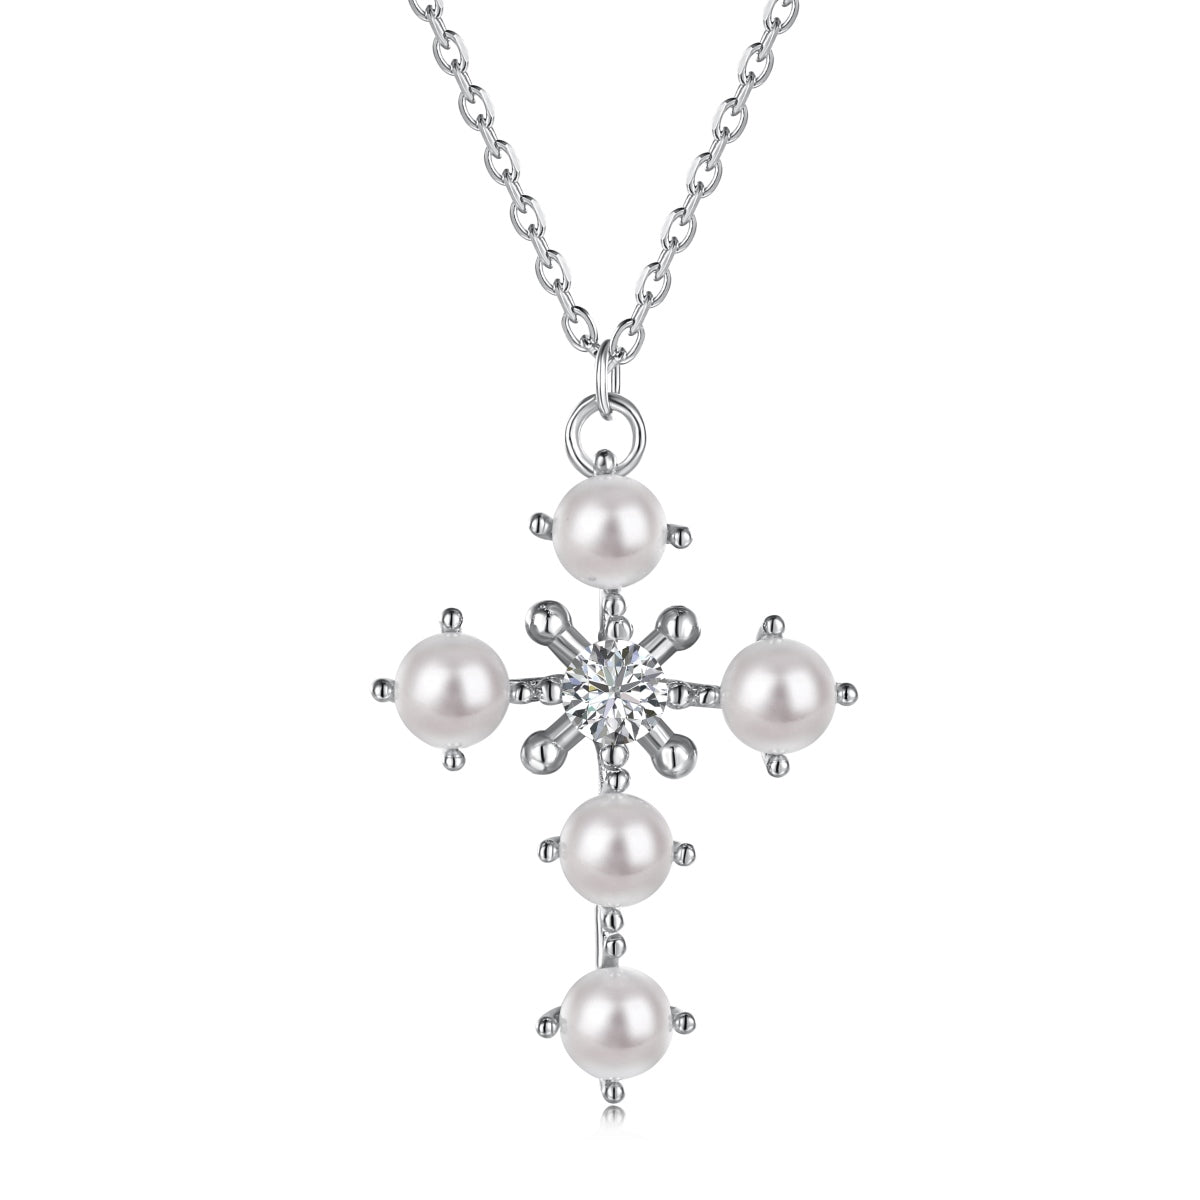 Cross fresh water pearl necklace